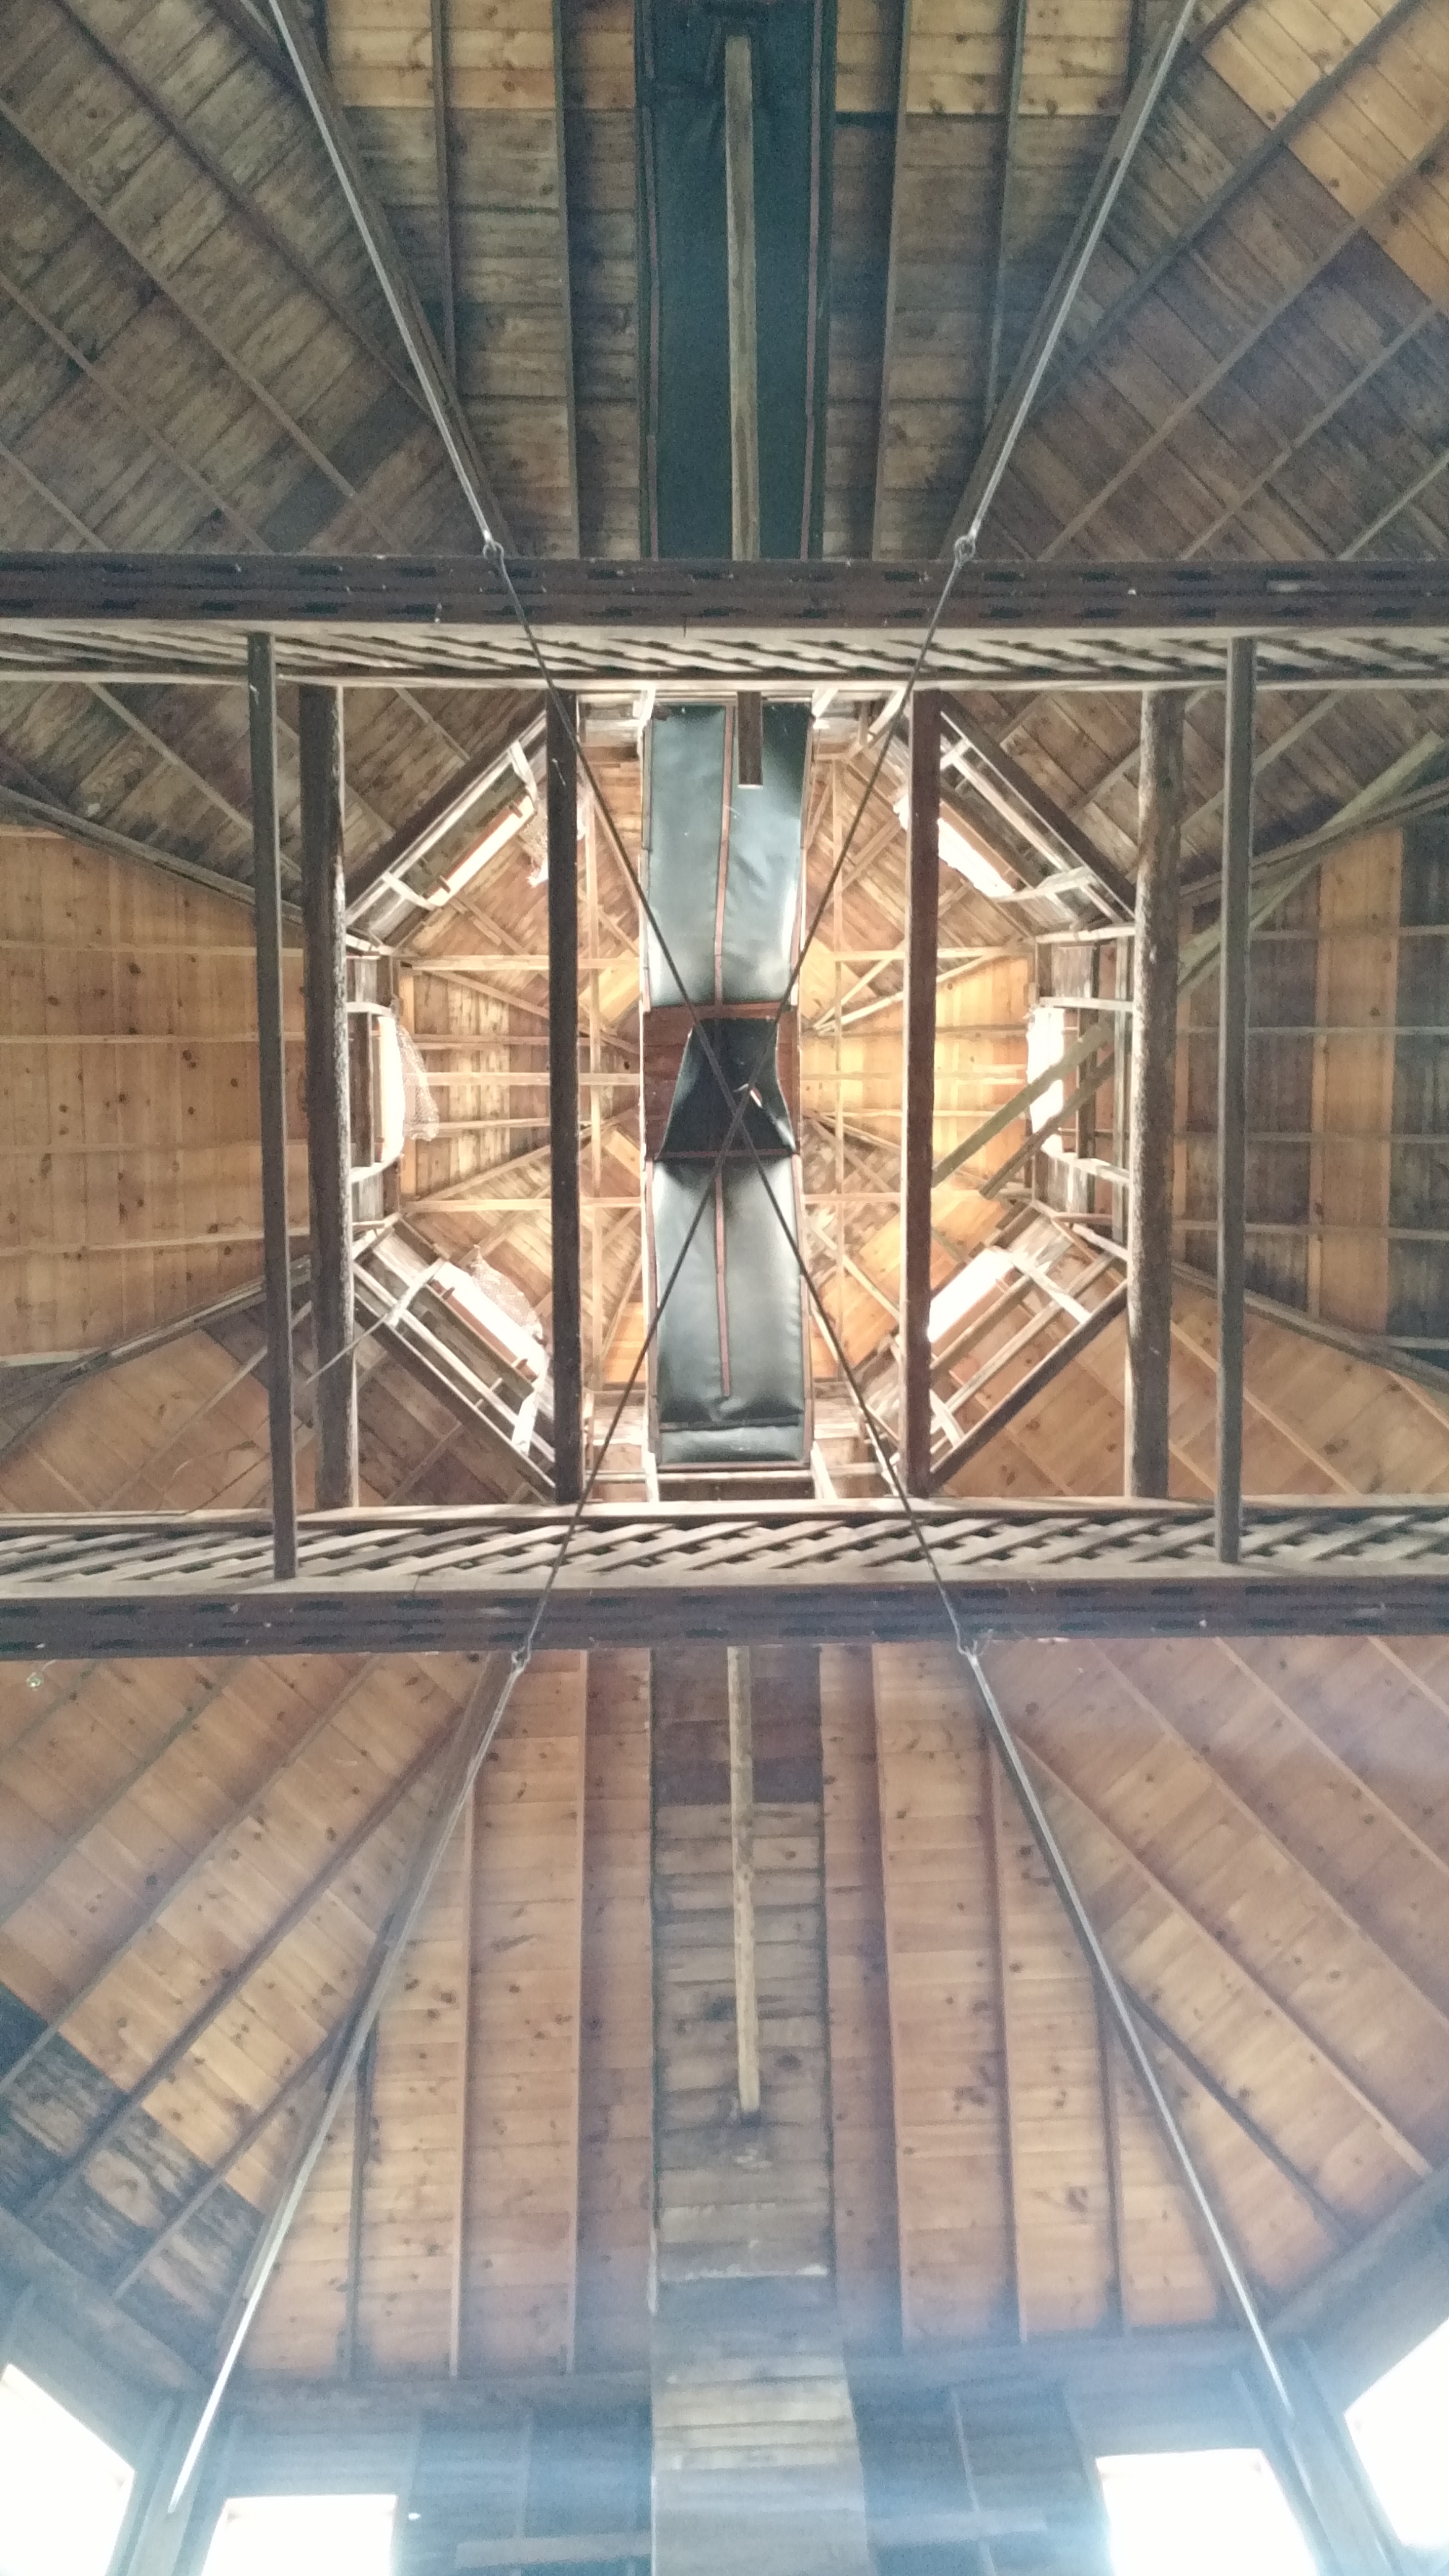 A unique view from inside the Octagon Barn